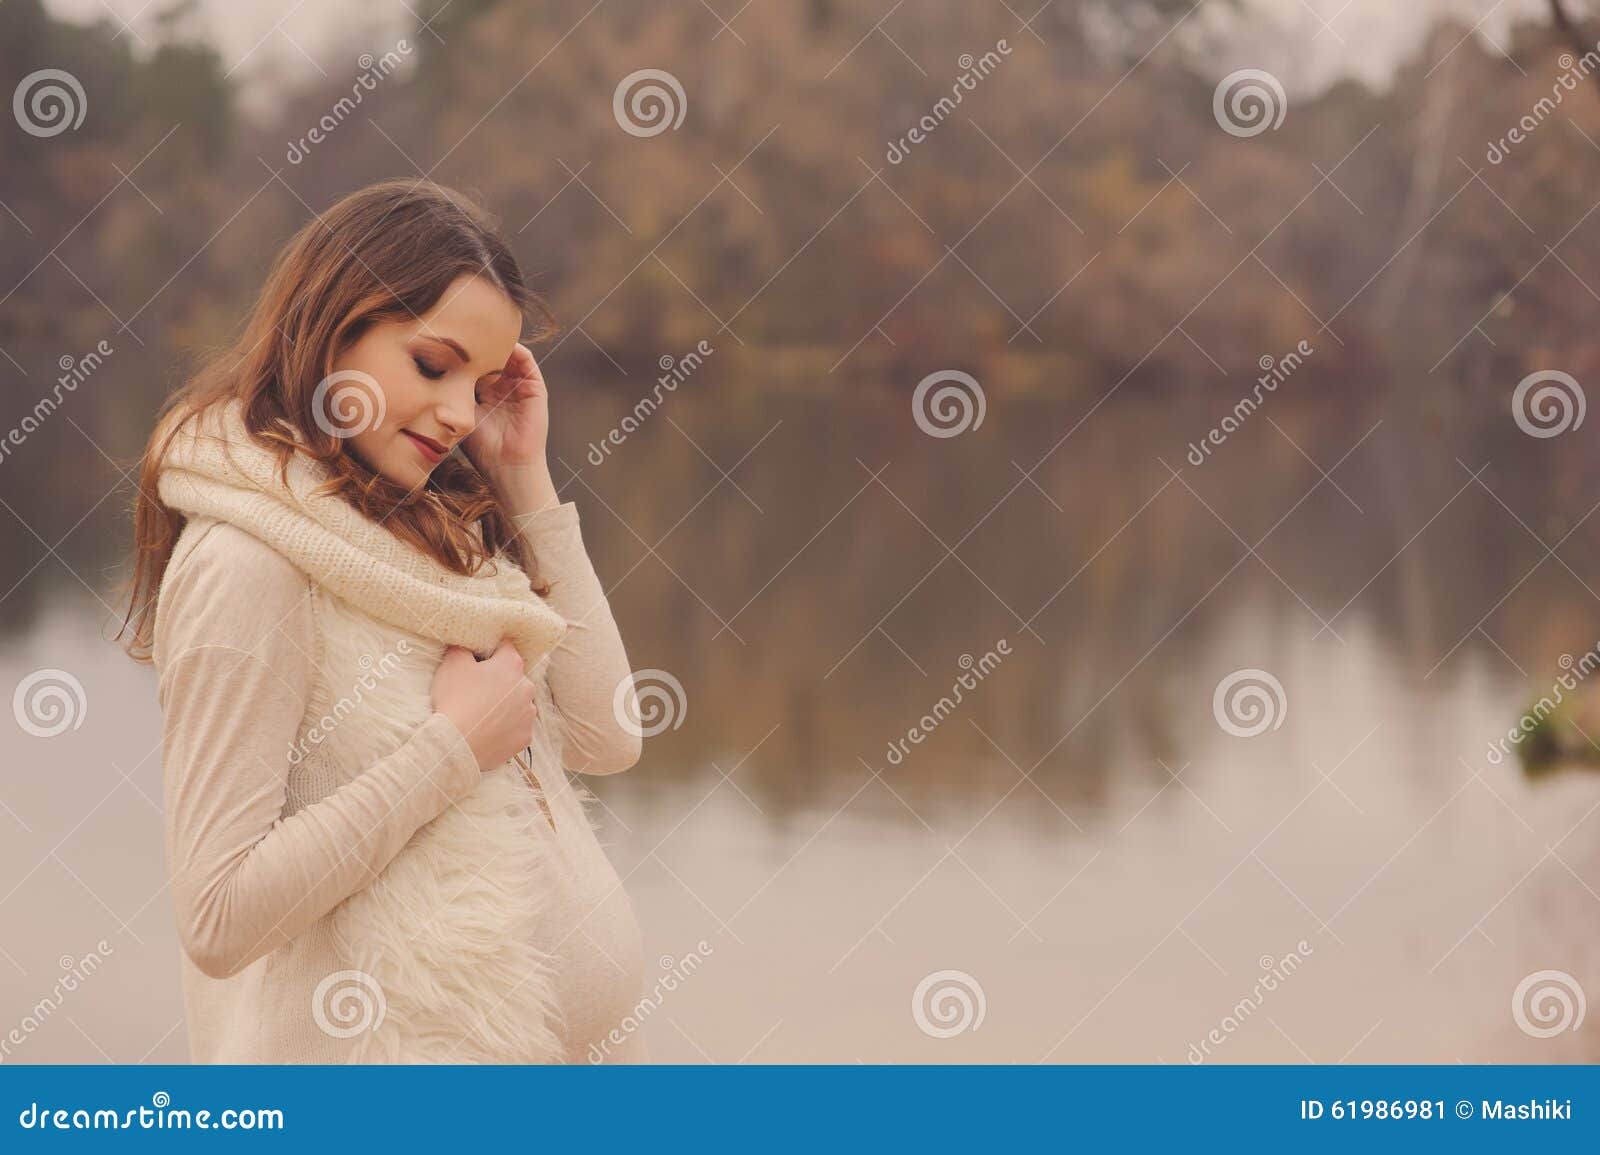 young beautiful pregnant woman on cozy warm walk on autumn riverside, warm toned, soft focus